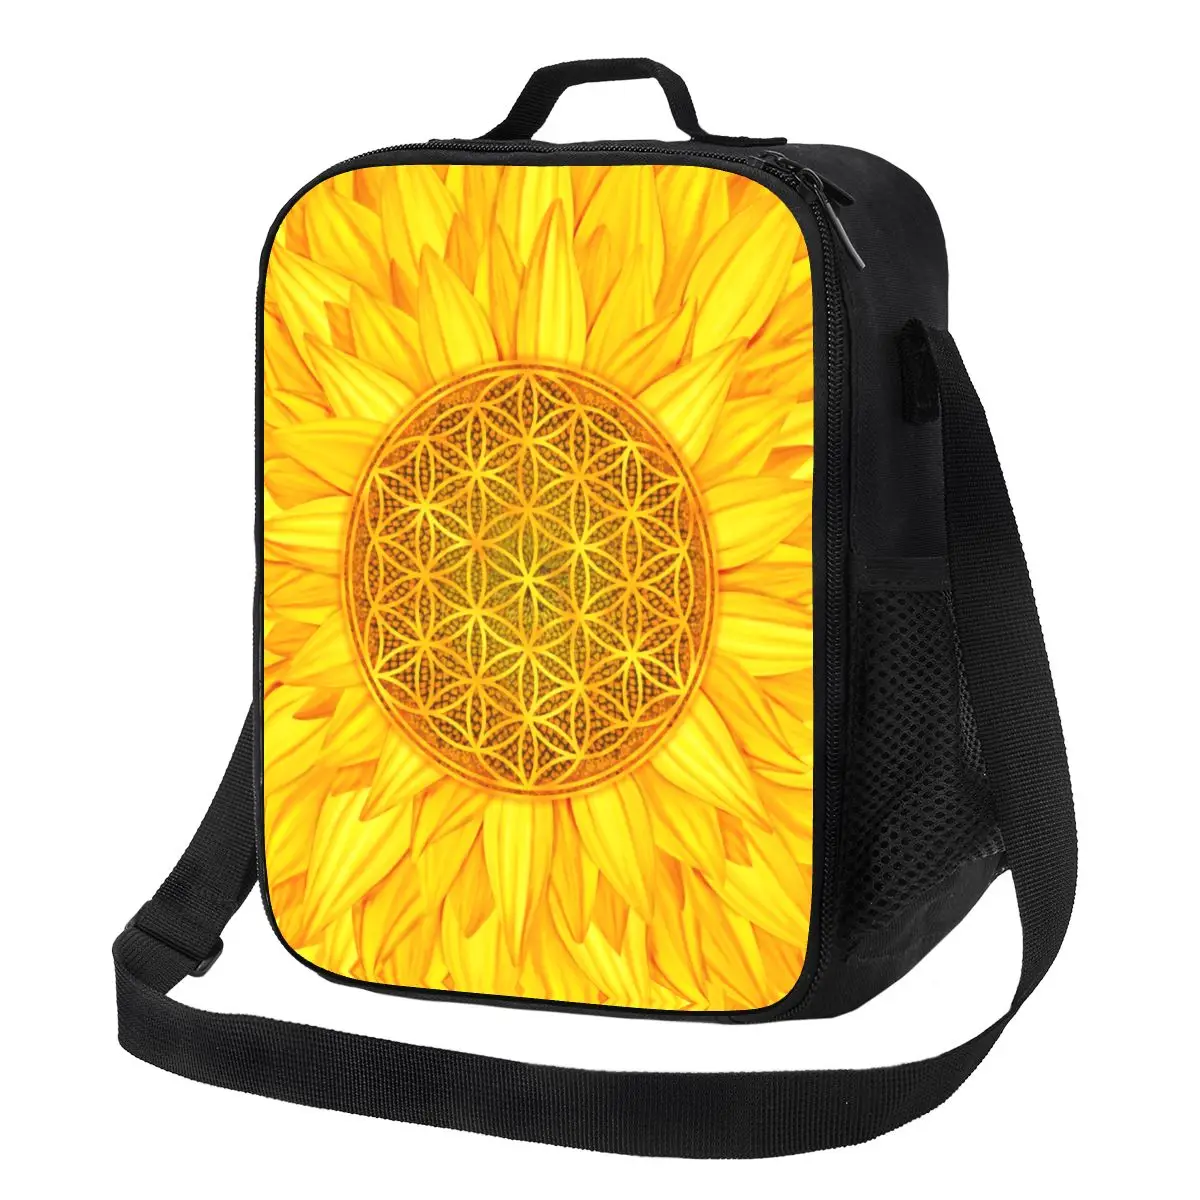 

Flower Of Life Sunflower Insulated Lunch Bag Mandala Floral Sacred Geometry Portable Thermal Cooler Food Bento Box Camp Travel